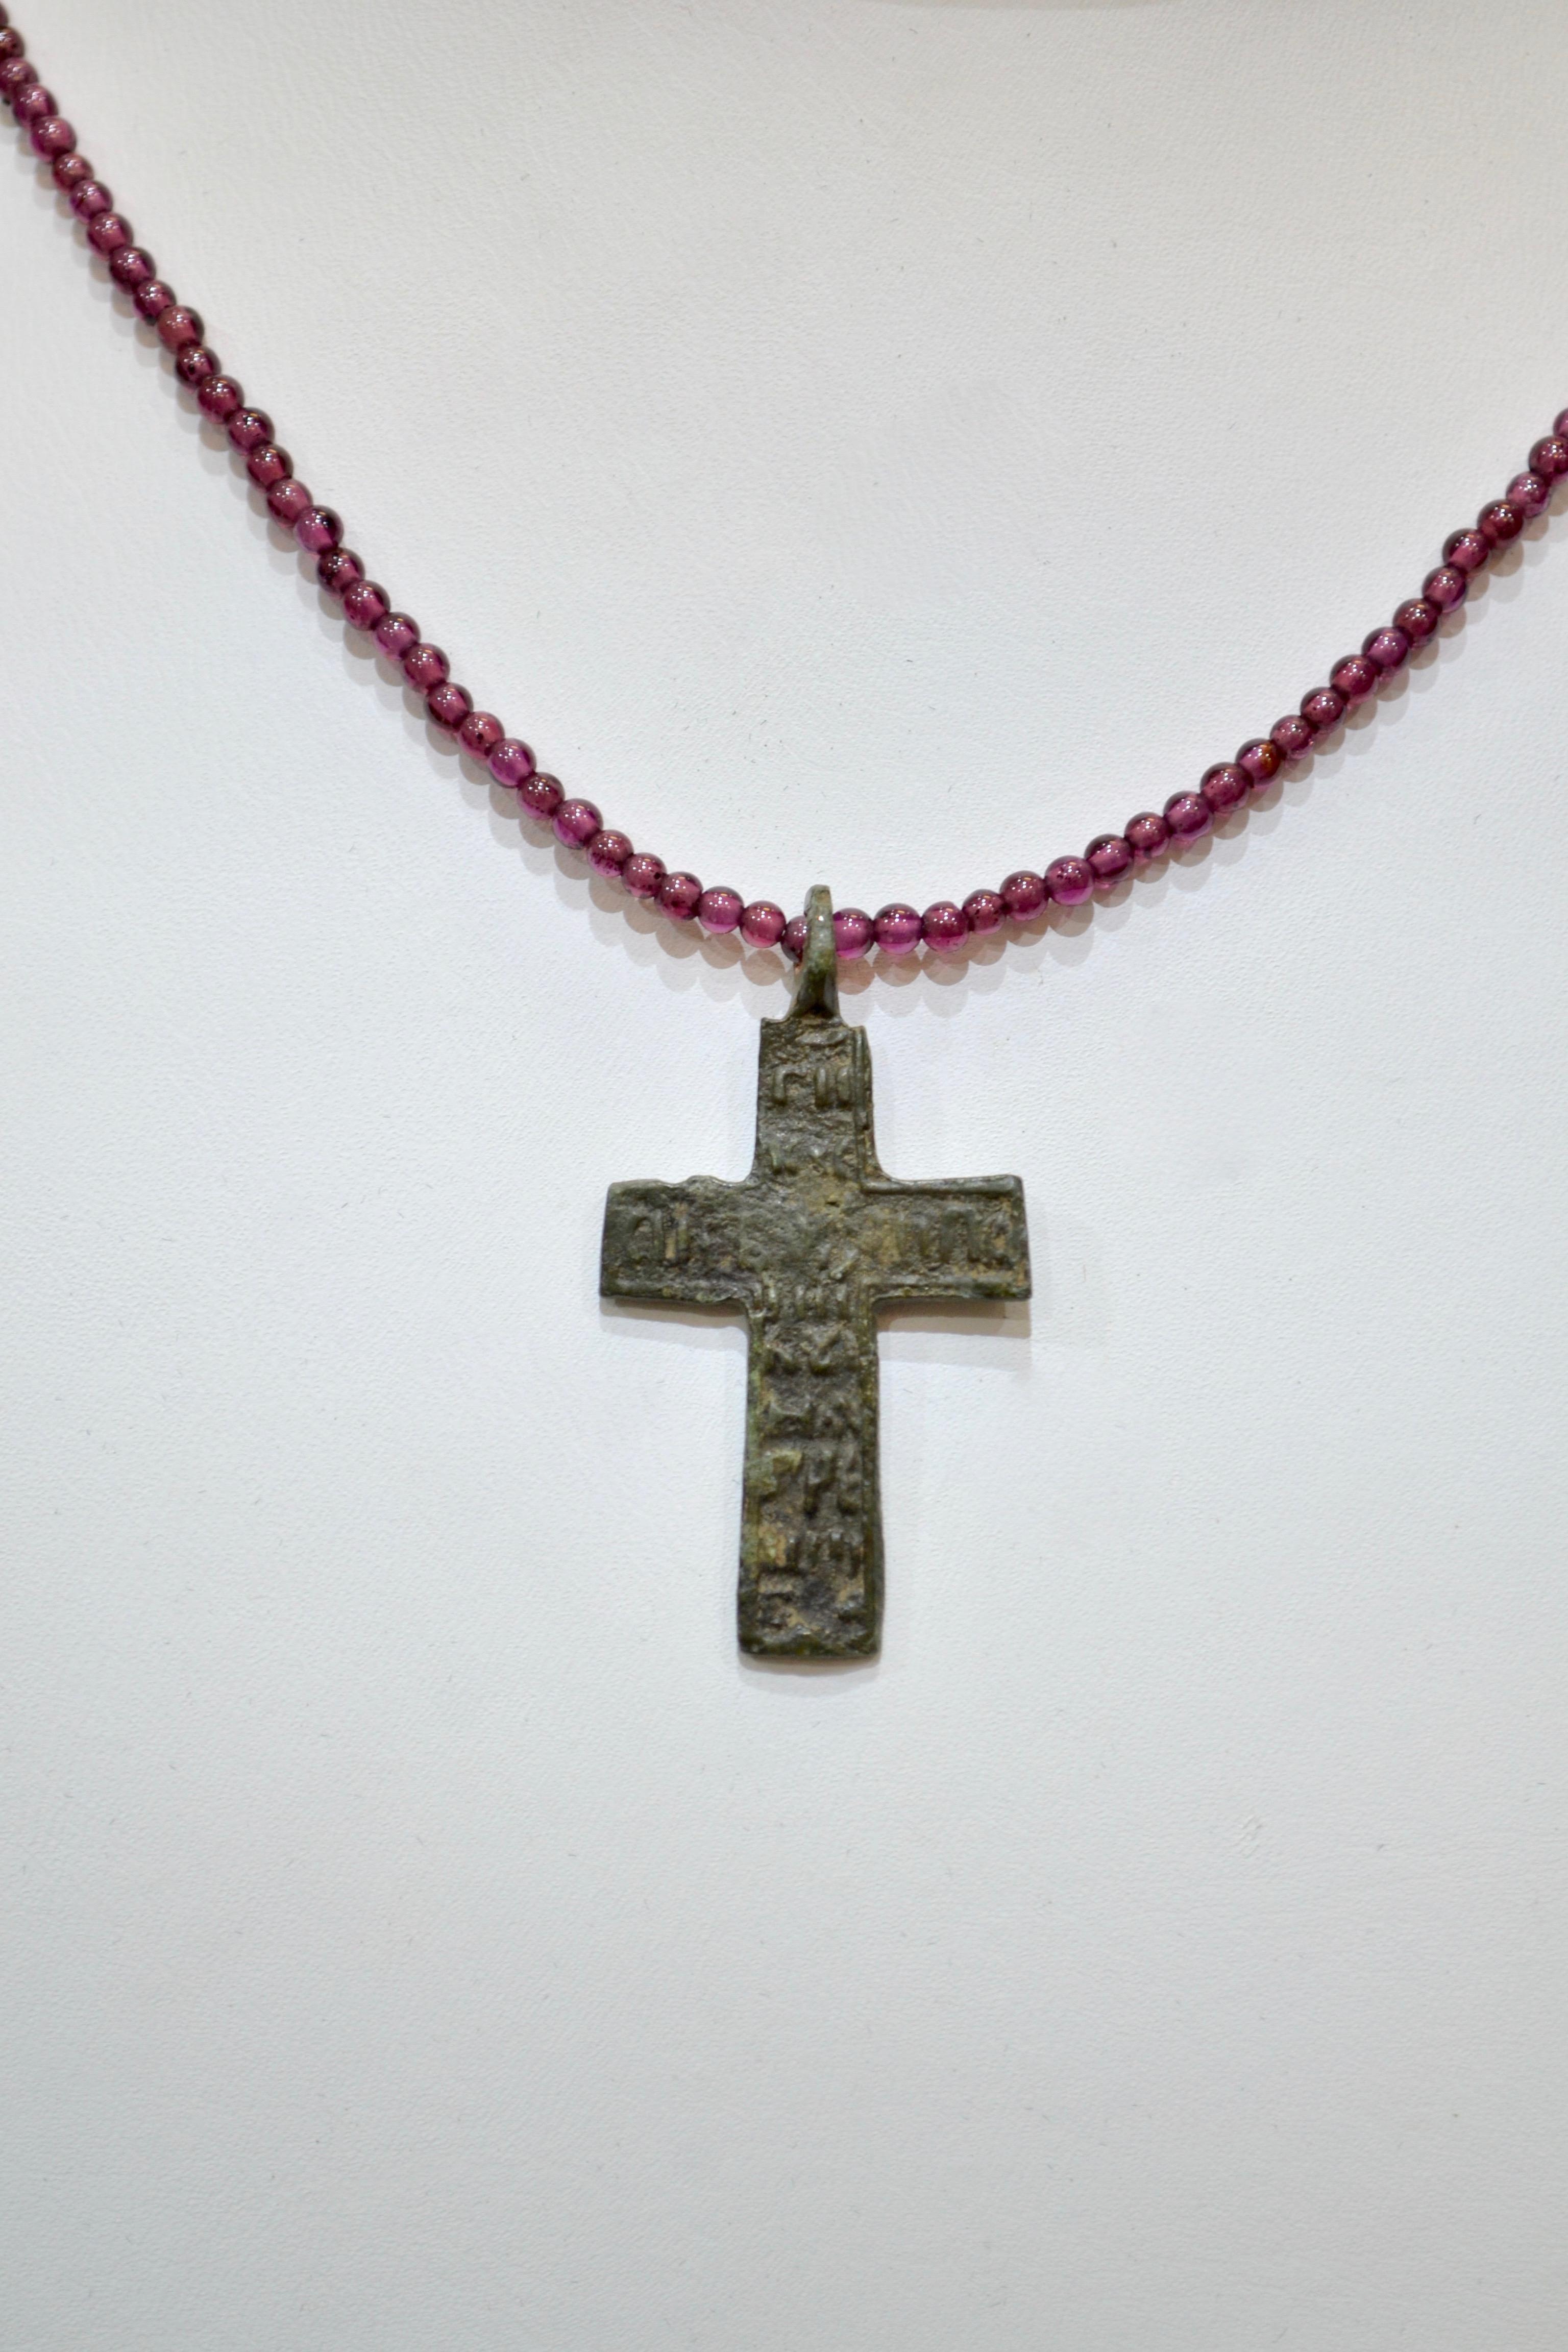 Late Medieval Bronze Cross Pendant. Professionally cleaned and polished to show original details. Obtained from an old British collection, acquired from the L.C.F. (London) Mounted on a beautiful garnet beaded necklace.